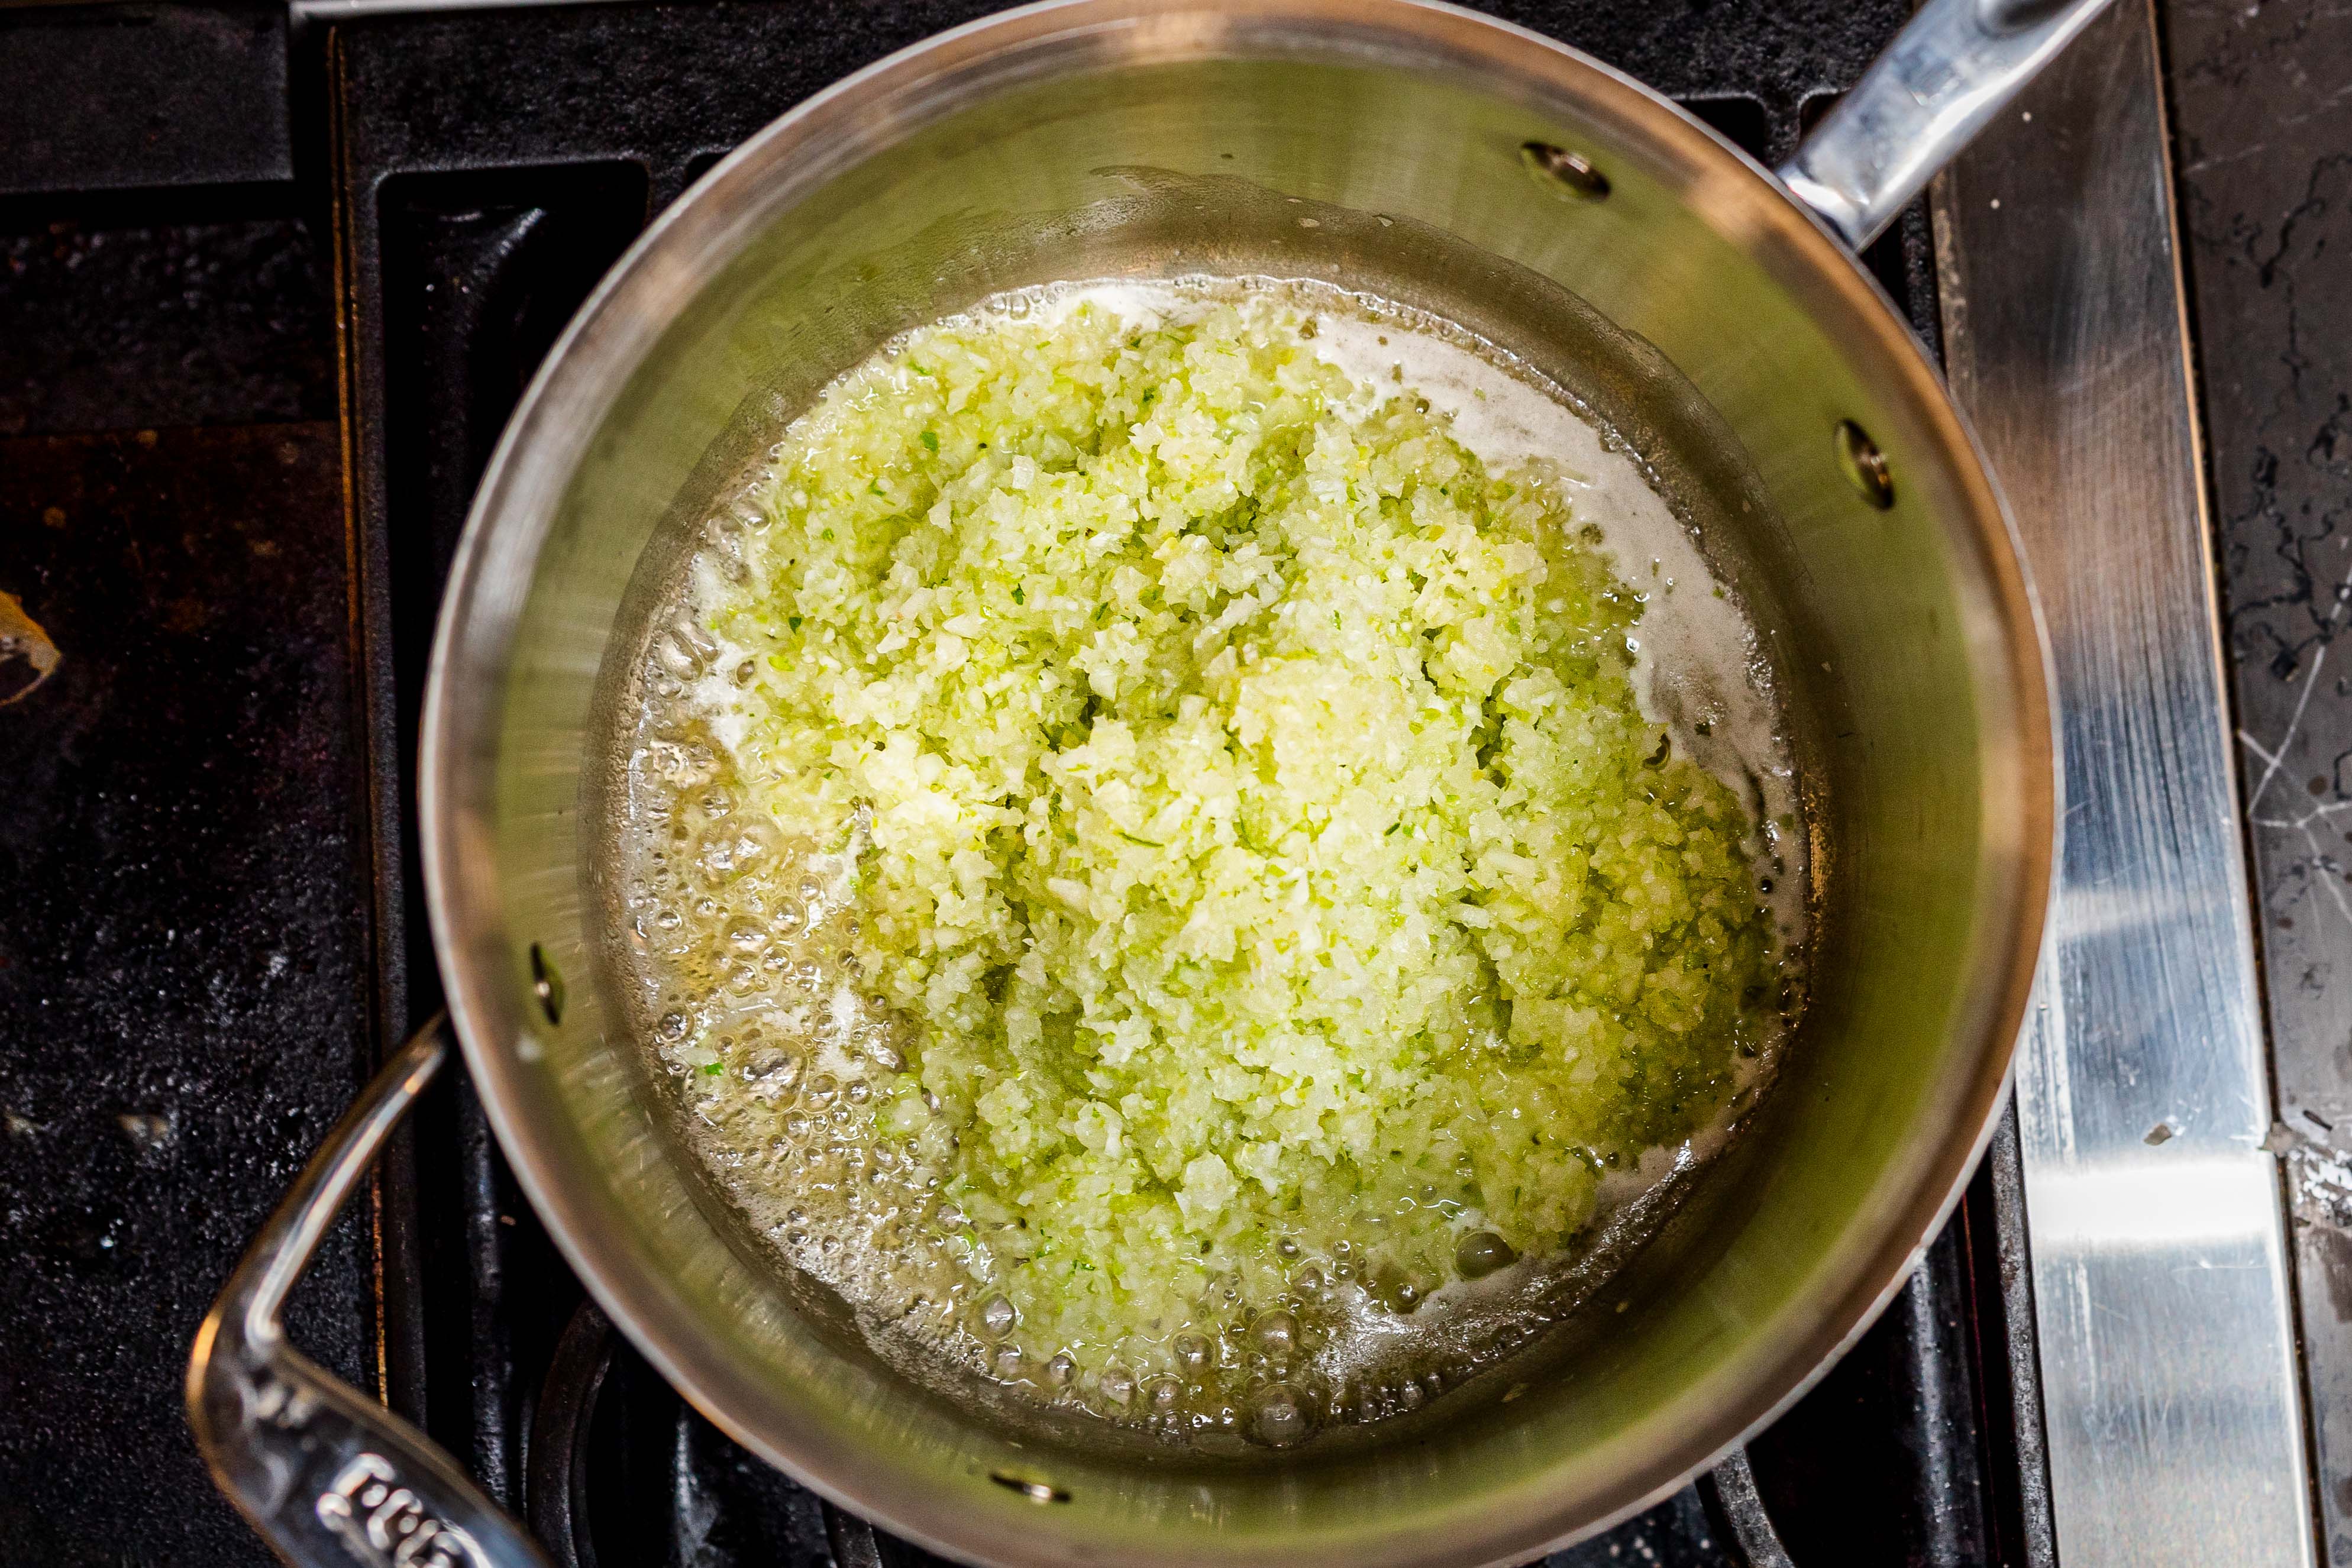 Cooking the onion and celery until softened